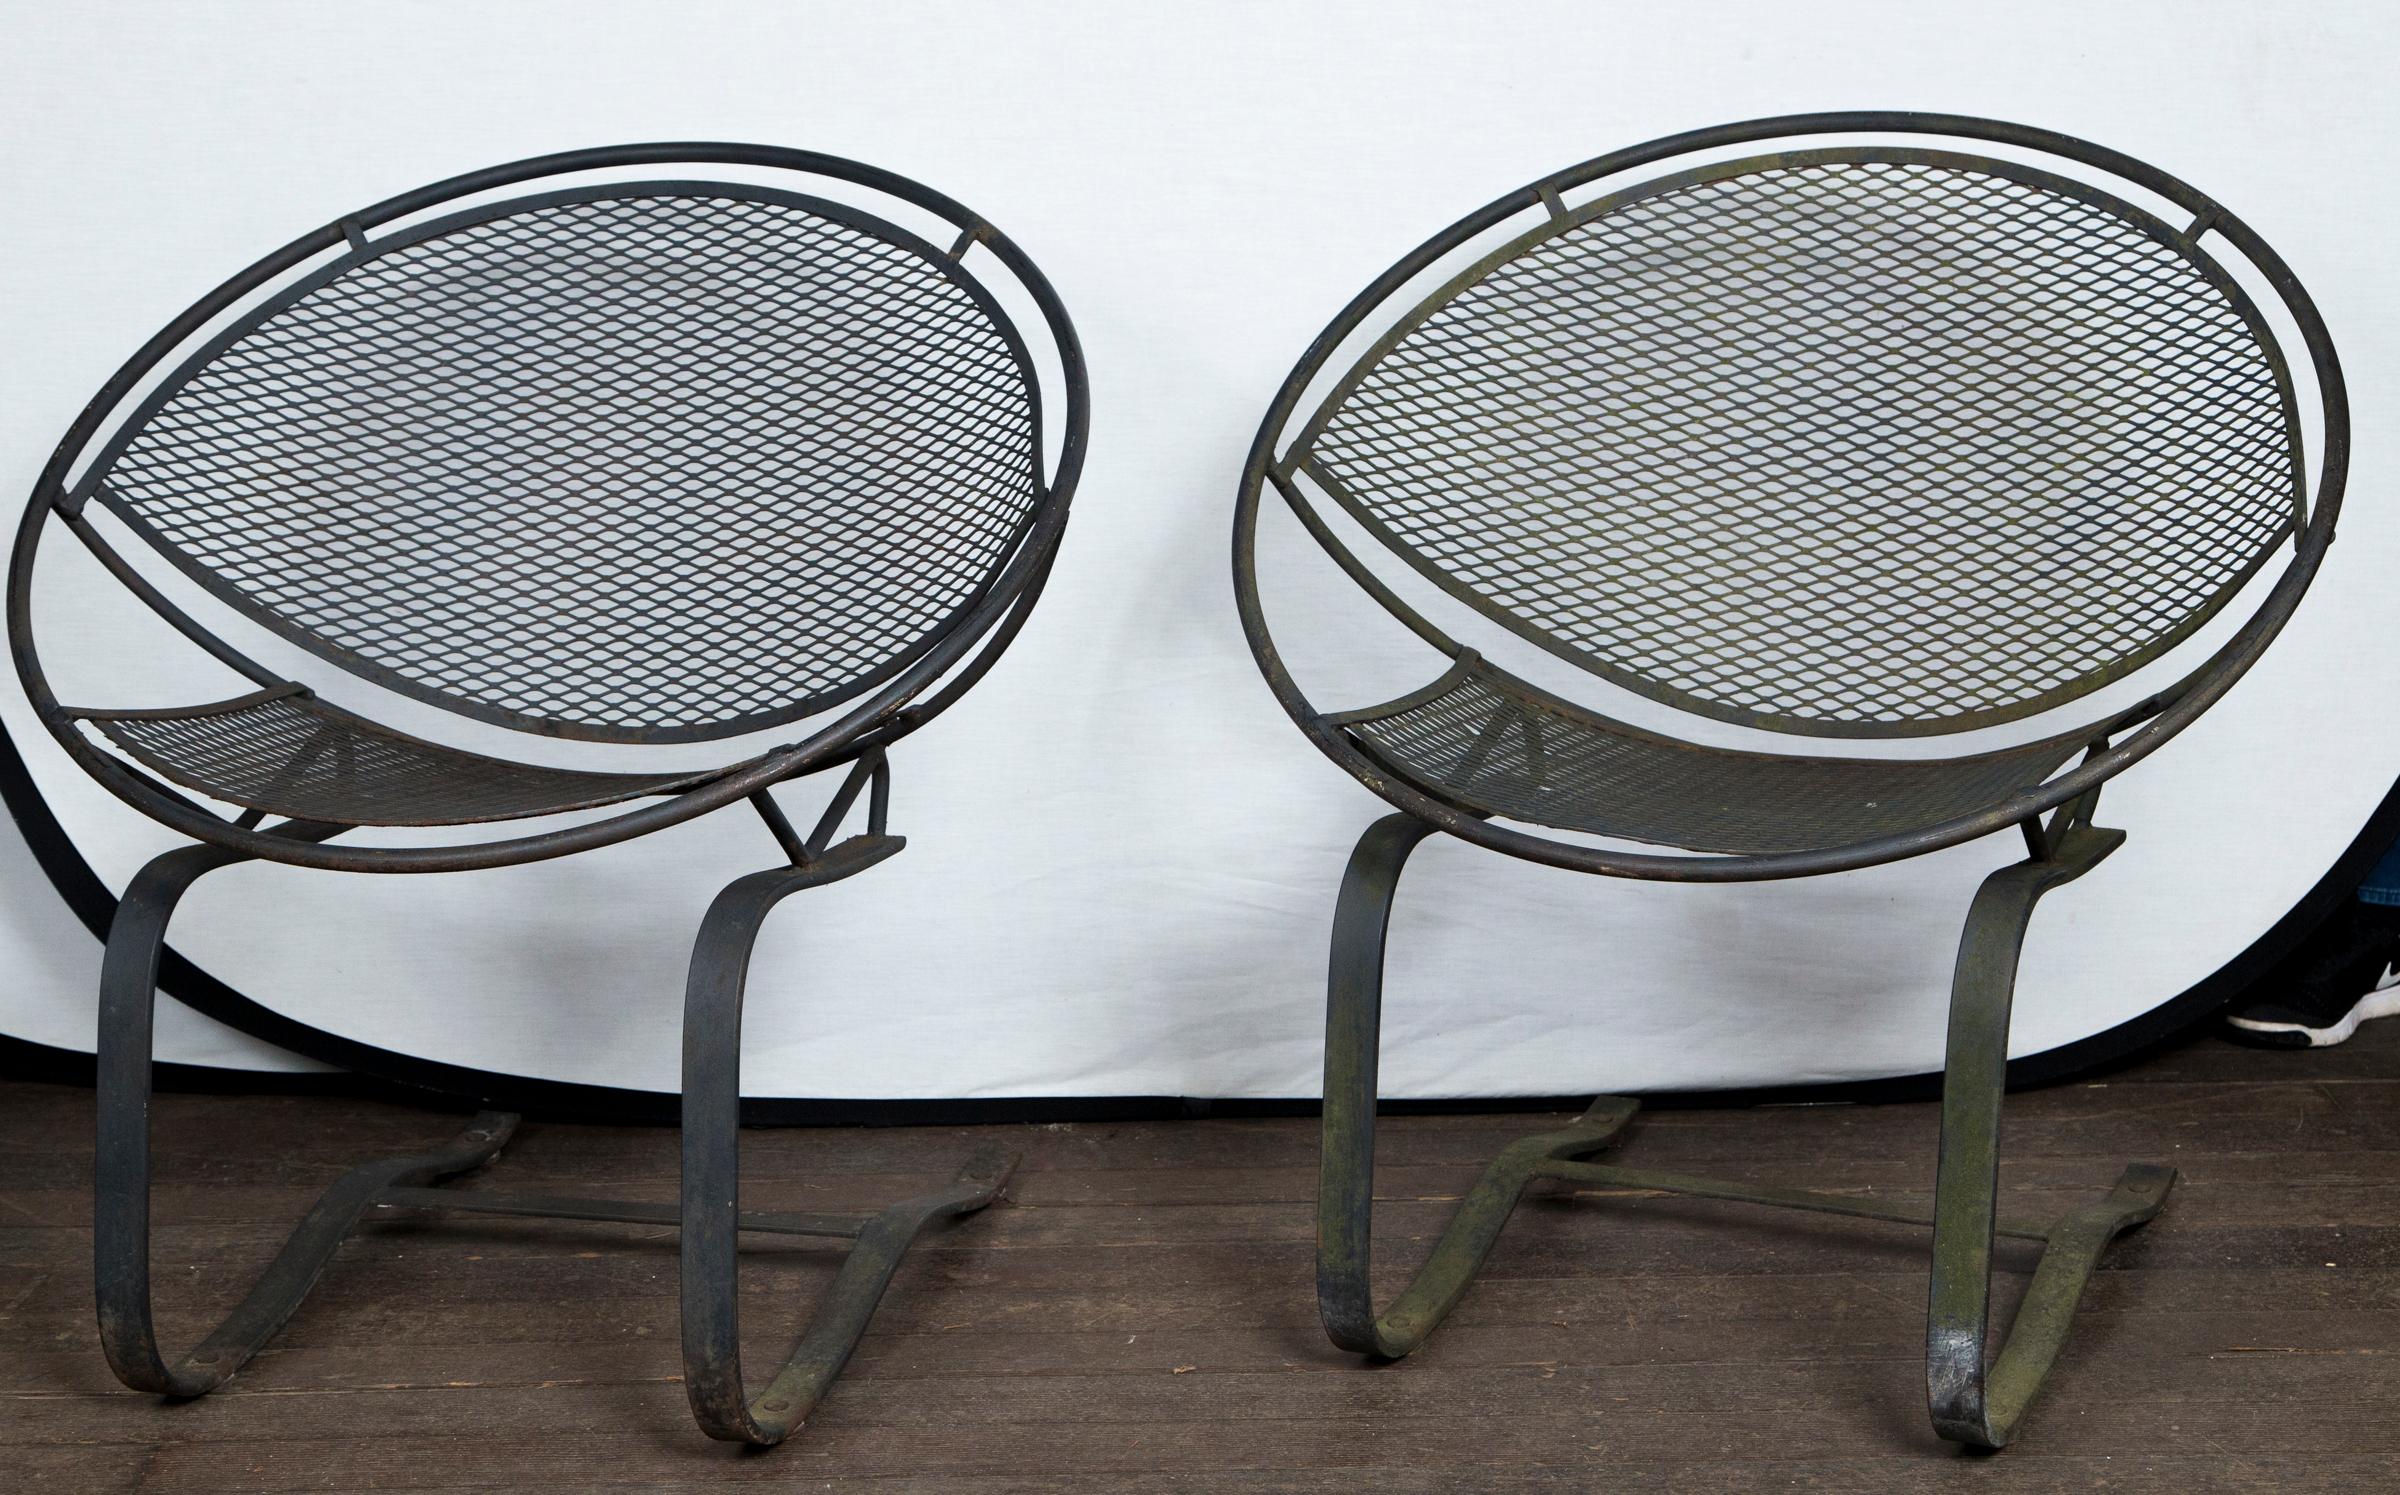 A pair of Maurizio Tempestini for Salterini radar saucer chairs. Hard to find spring version. Mid-Century Modern circa 1950s wrought iron chairs.